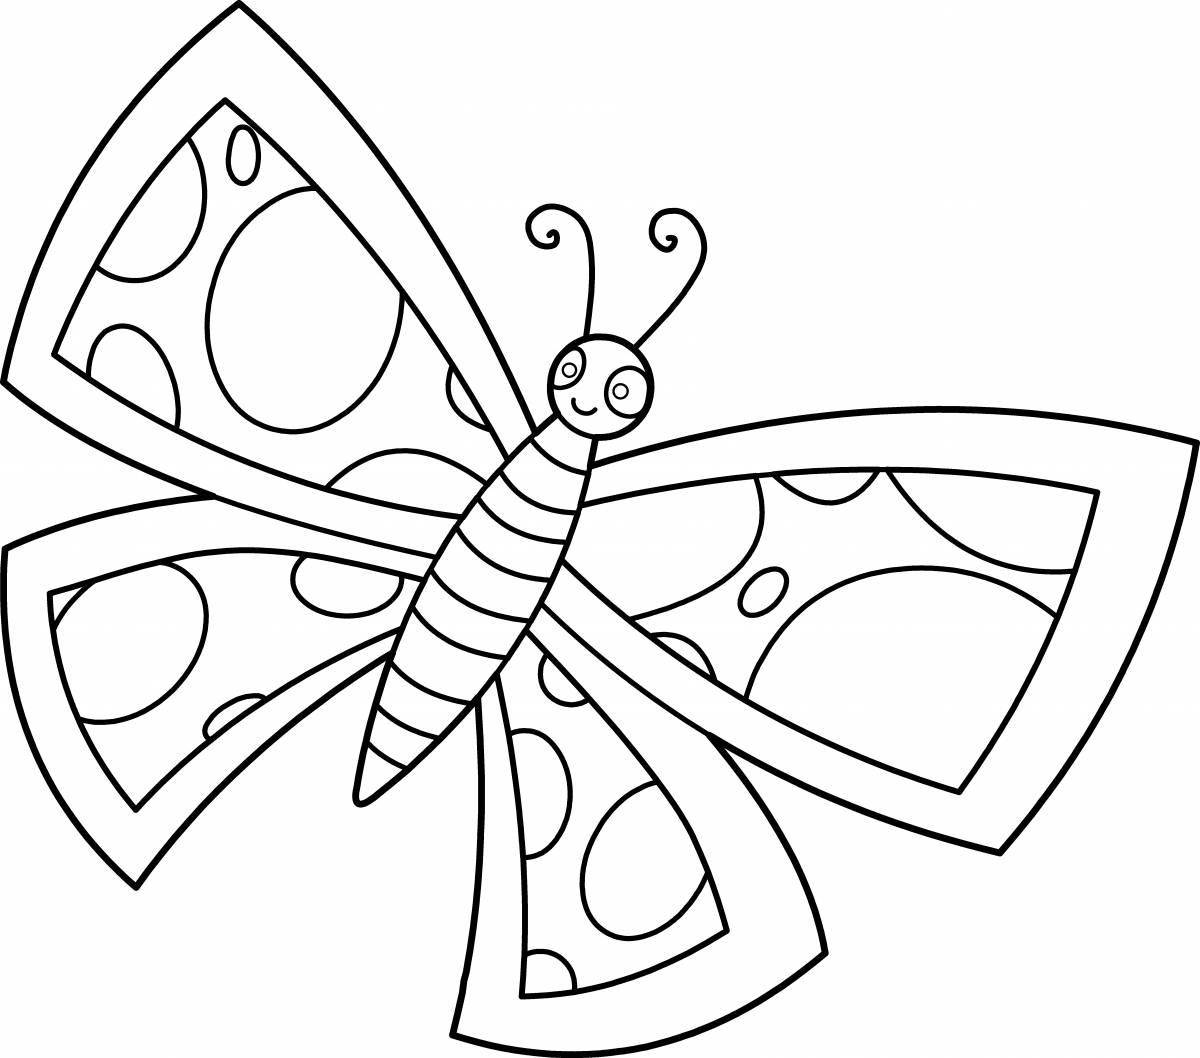 Playful black and white butterflies coloring book